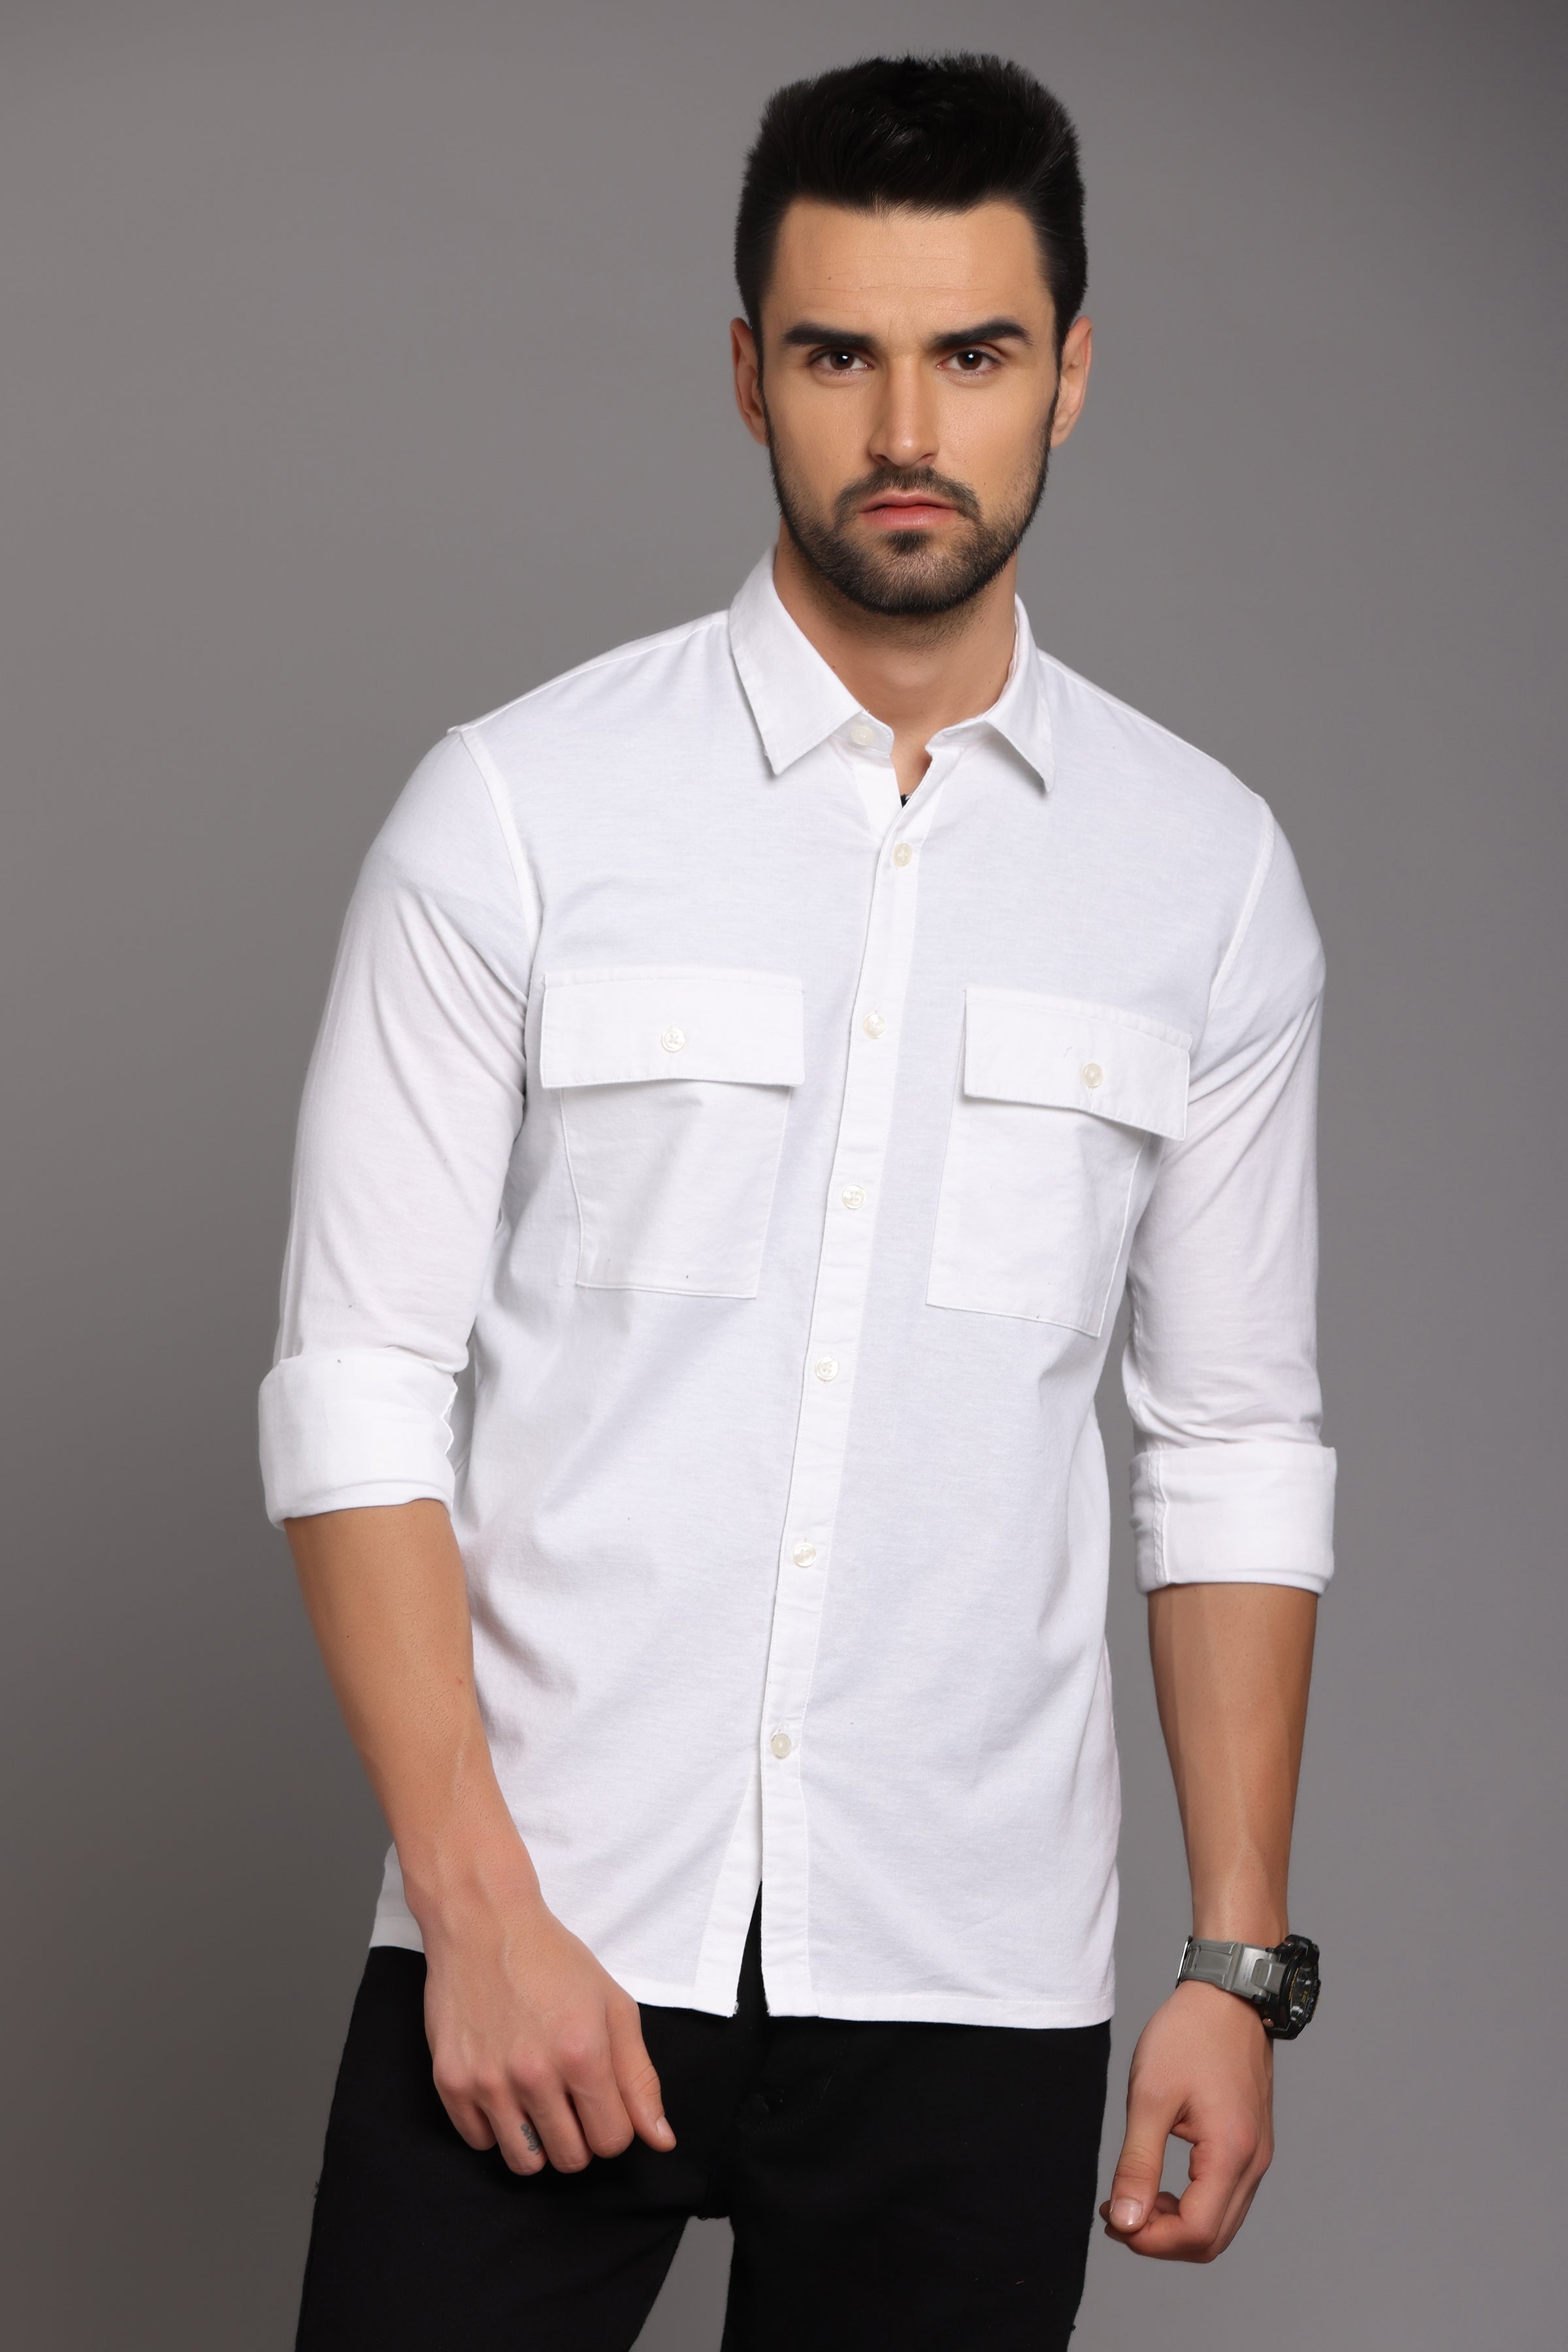 White Full Sleeve Shirt with Double Pocket Shirts Project 30 S 